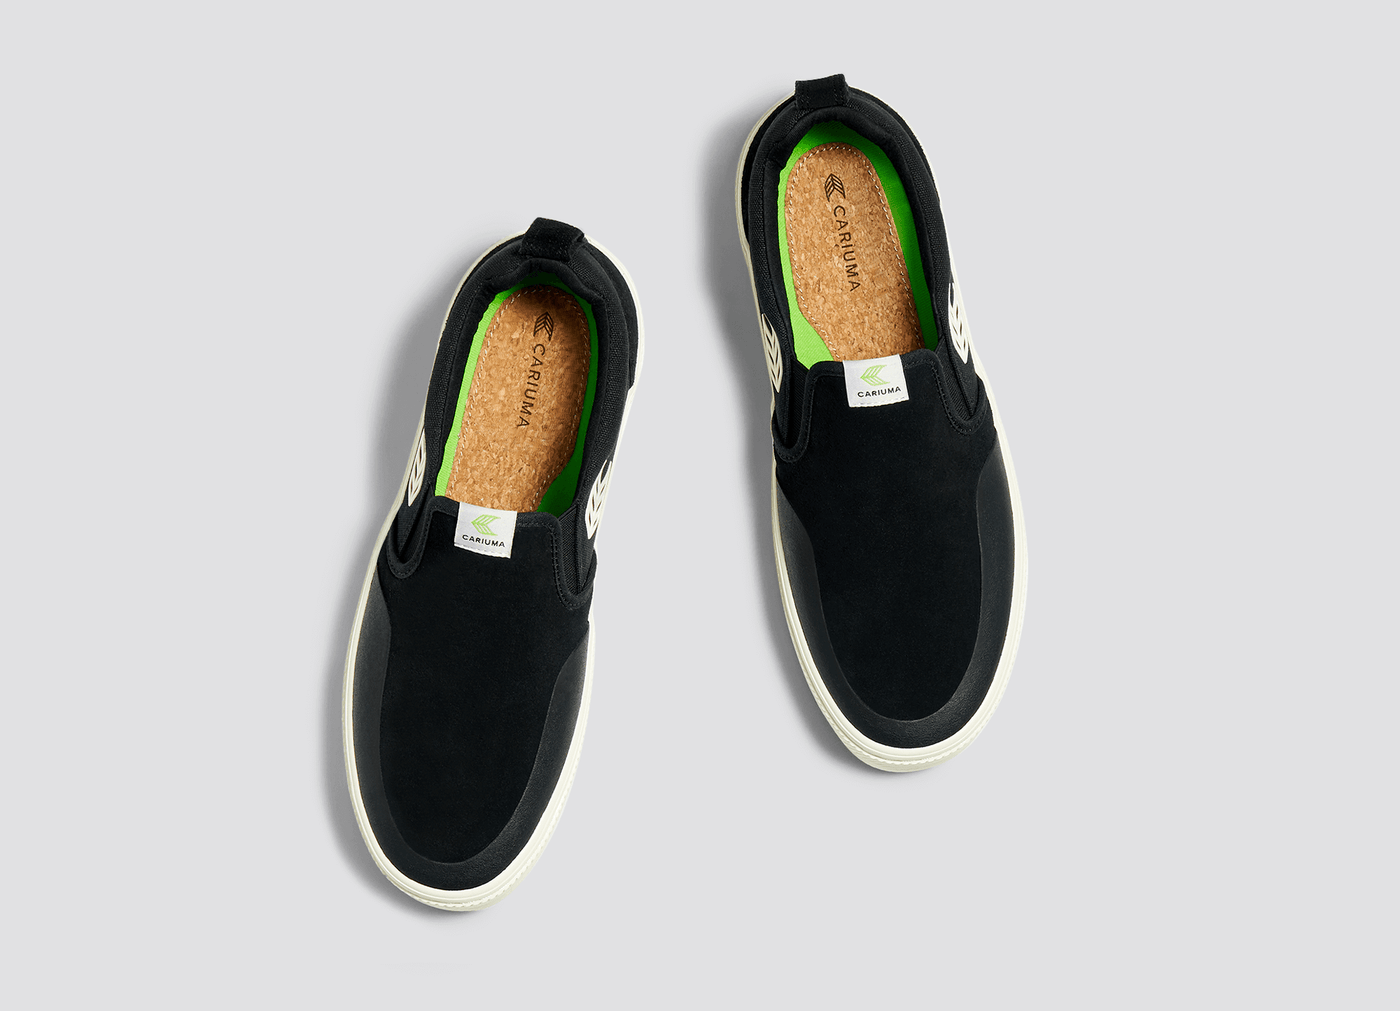 SLIP ON Skate PRO Black Suede and Canvas Ivory Logo Sneaker Women